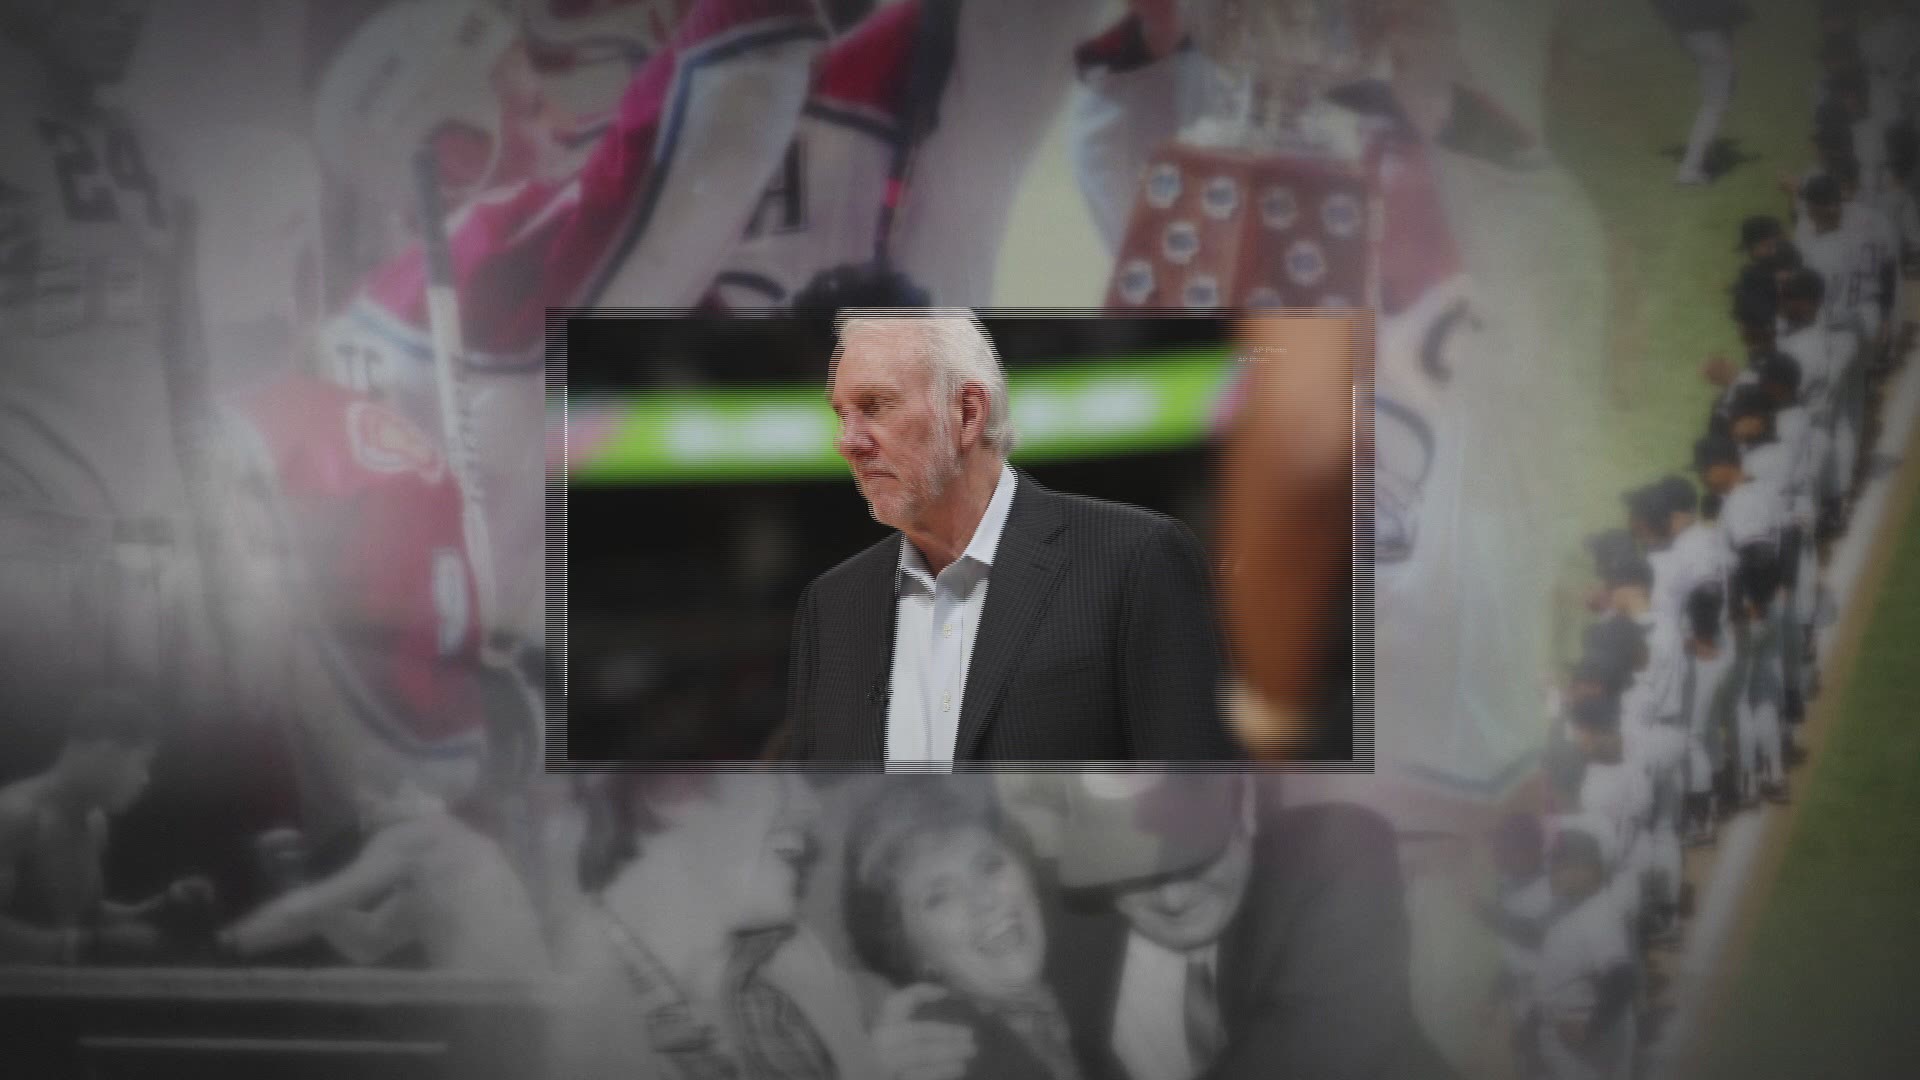 On April 3, 2019, Spurs coach Gregg Popovich was ejected from his team's game against the Nuggets in just 63 seconds.